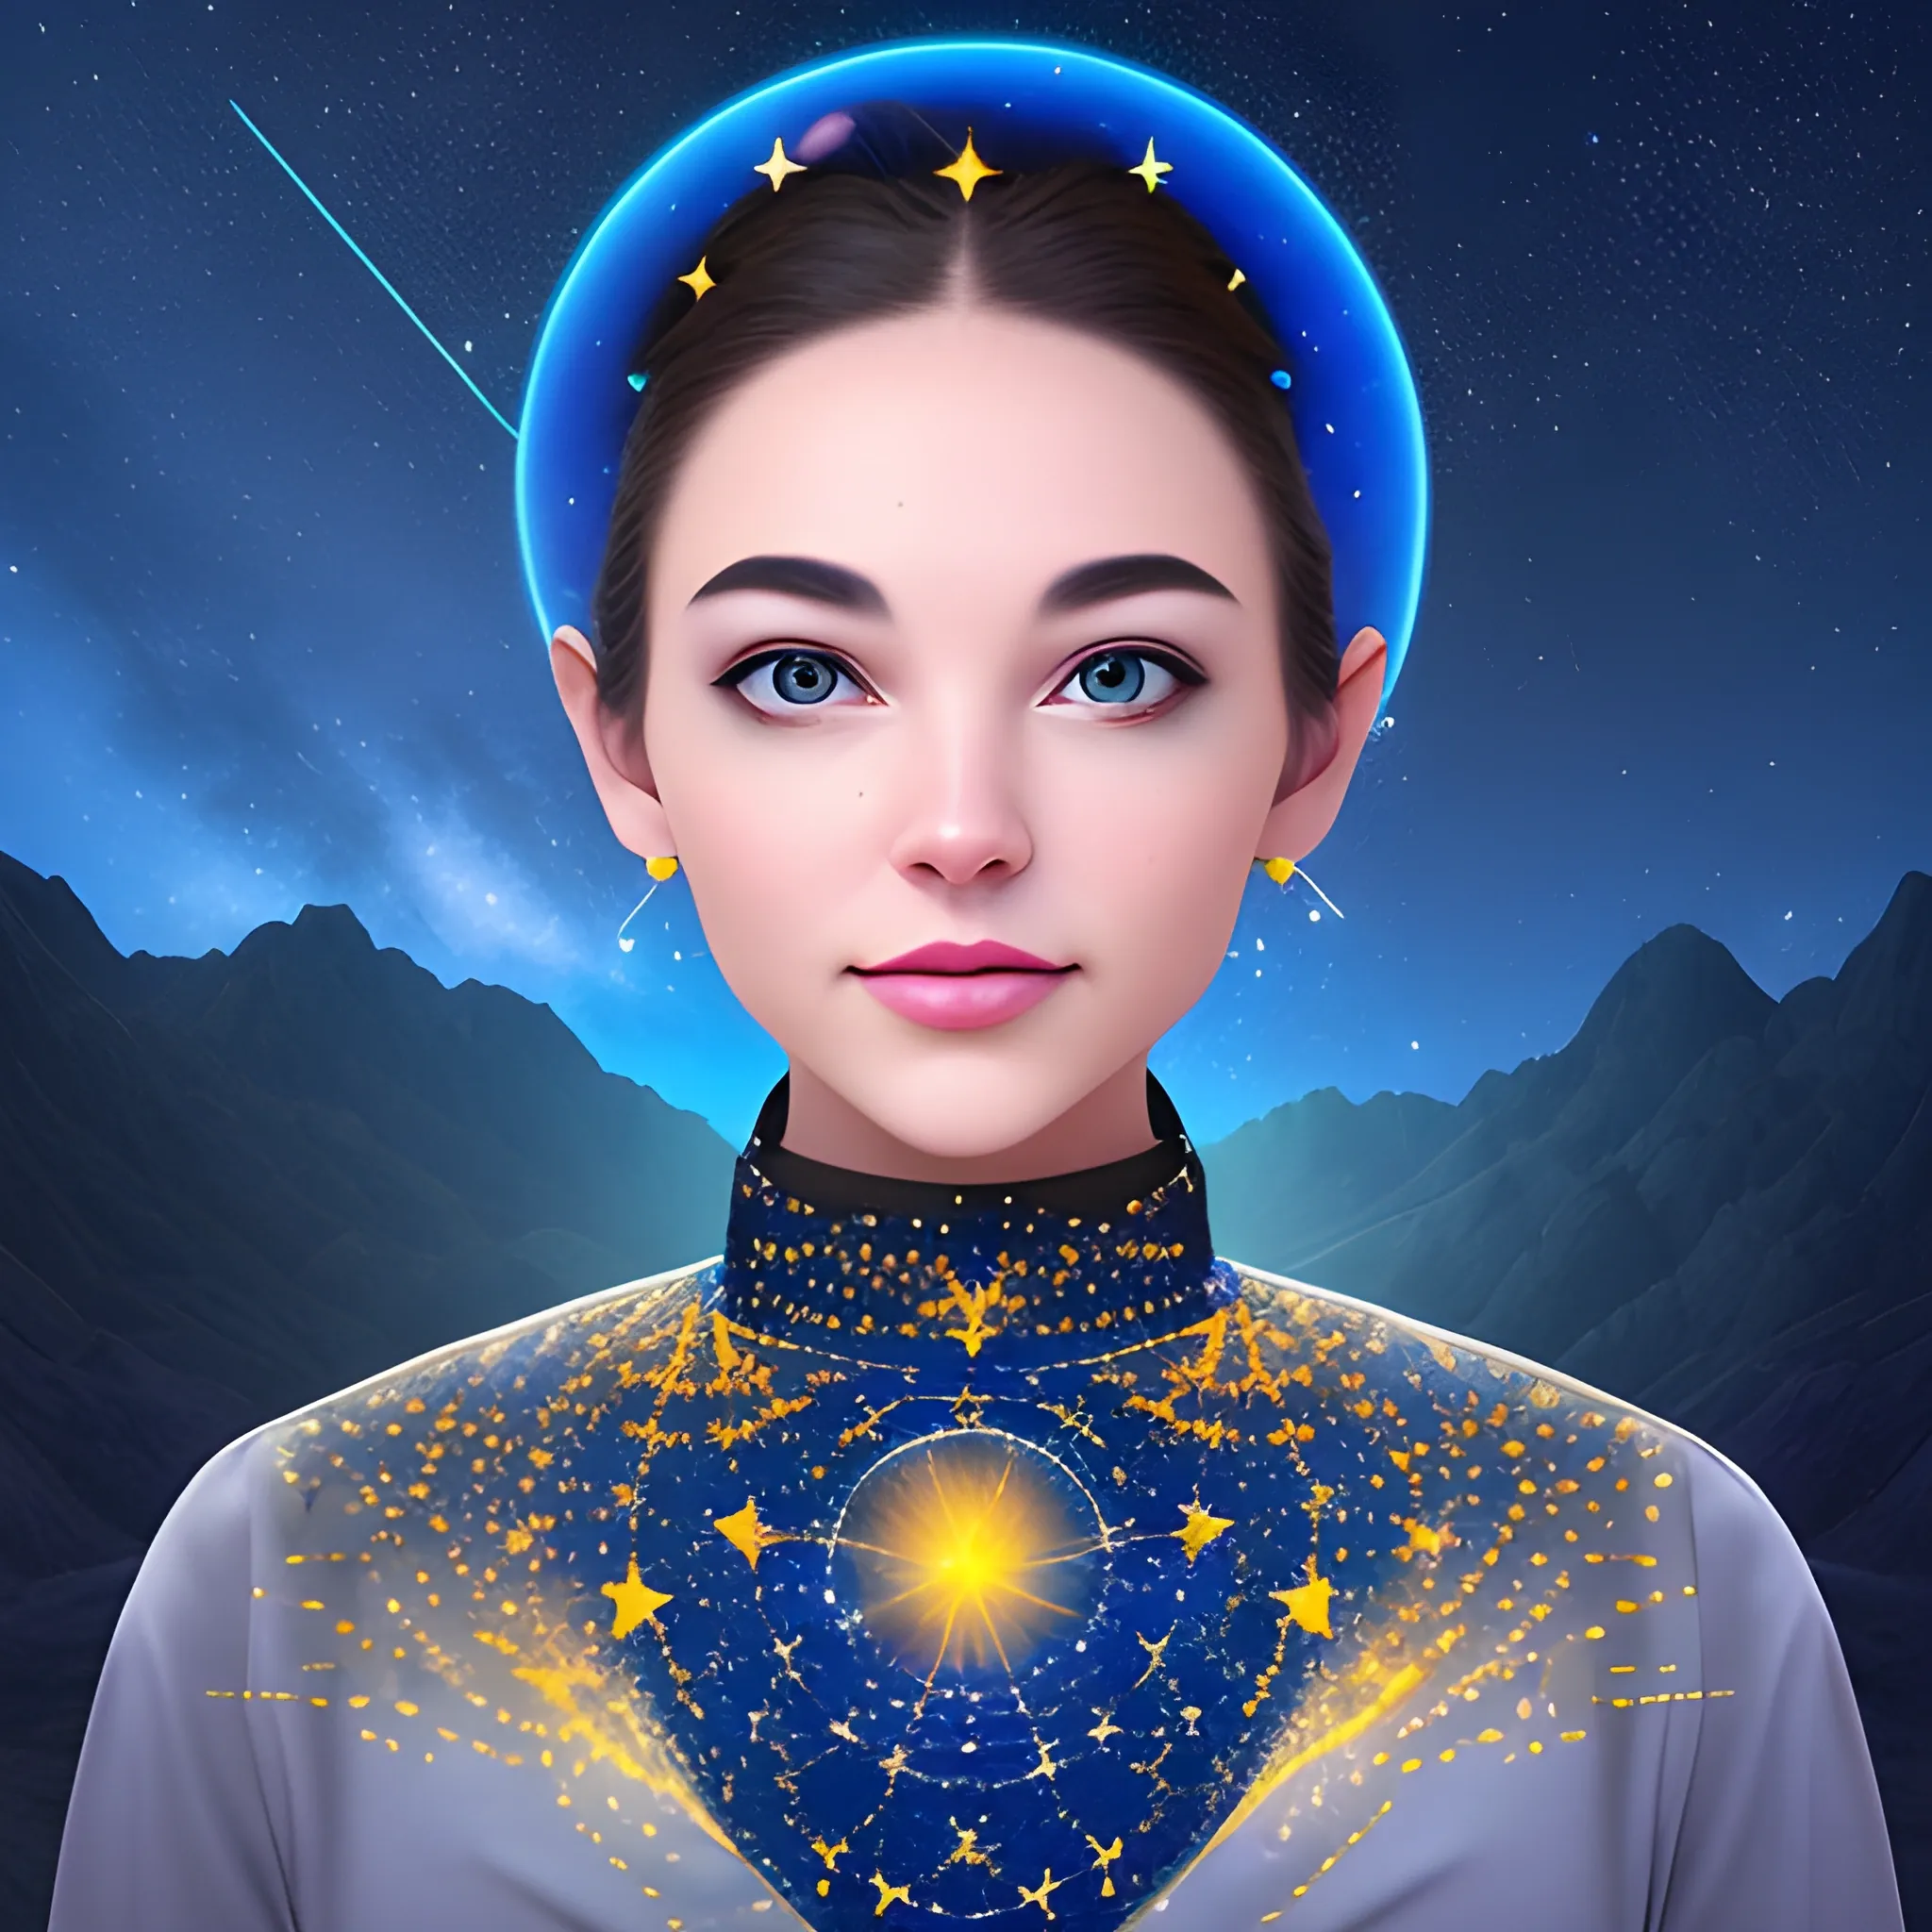 Design a captivating 3D host facing the camera, visible up to the waist, amidst a mesmerizing starry background. Use your artistic flair to bring this cosmic scene to life and let the enchantment unfold under the starlit sky! host face should be towards camera , male, 3D